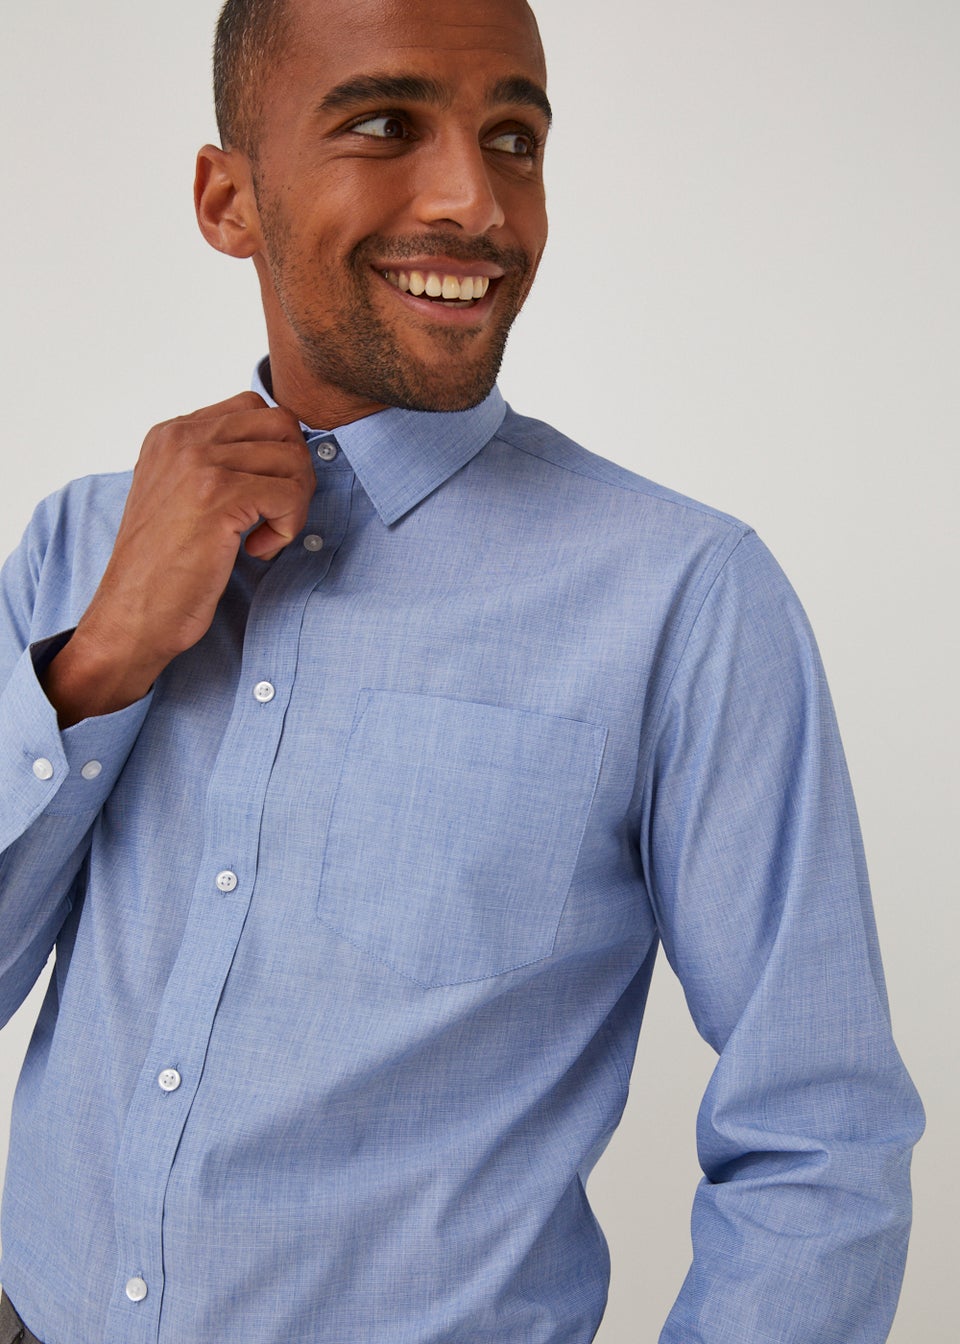 Taylor & Wright Blue Easy Care Regular Fit Shirt